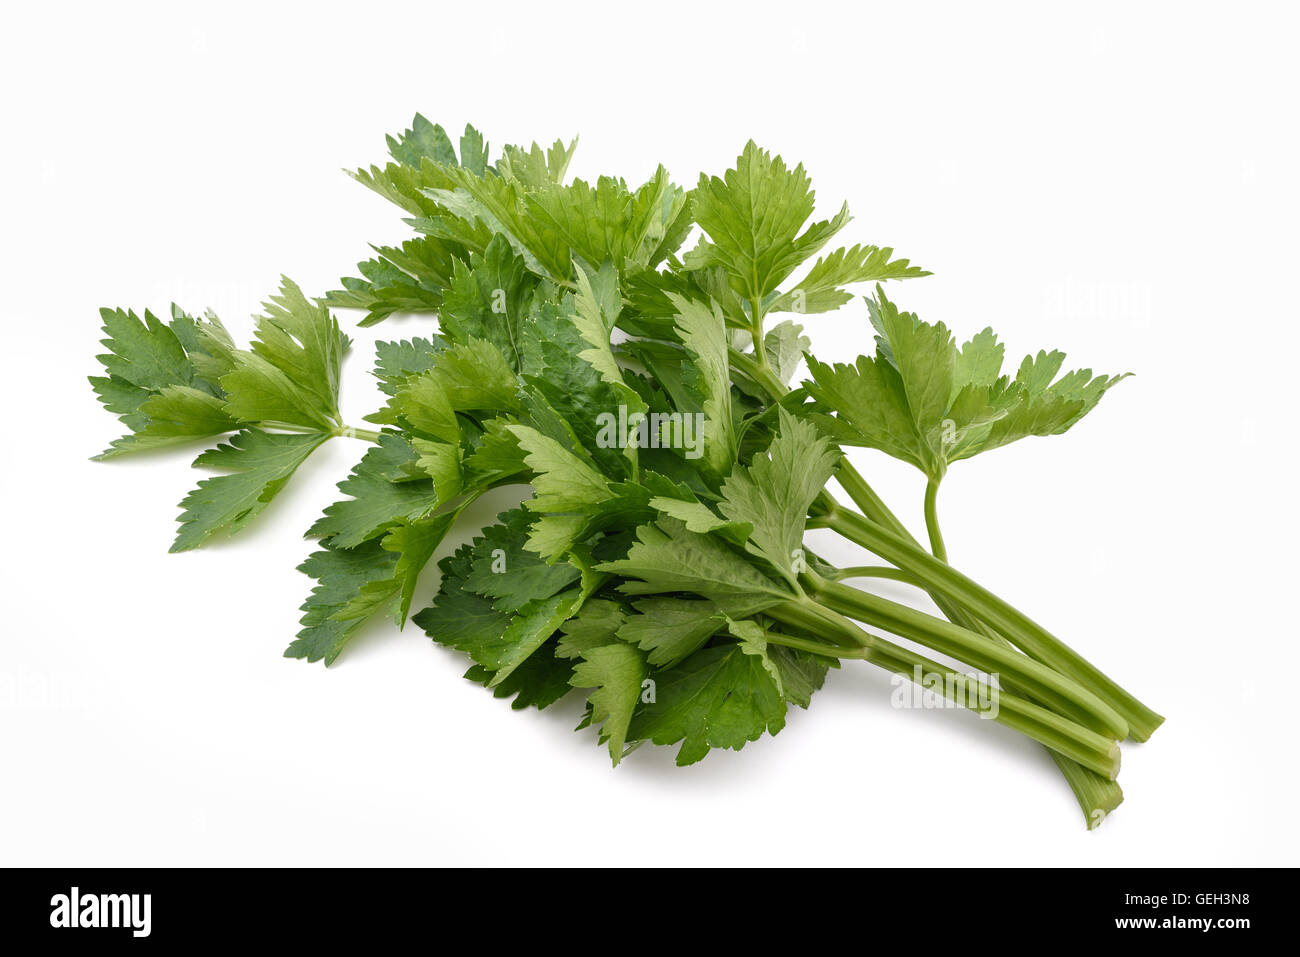 Green celery bunch  isolated on white background Stock Photo